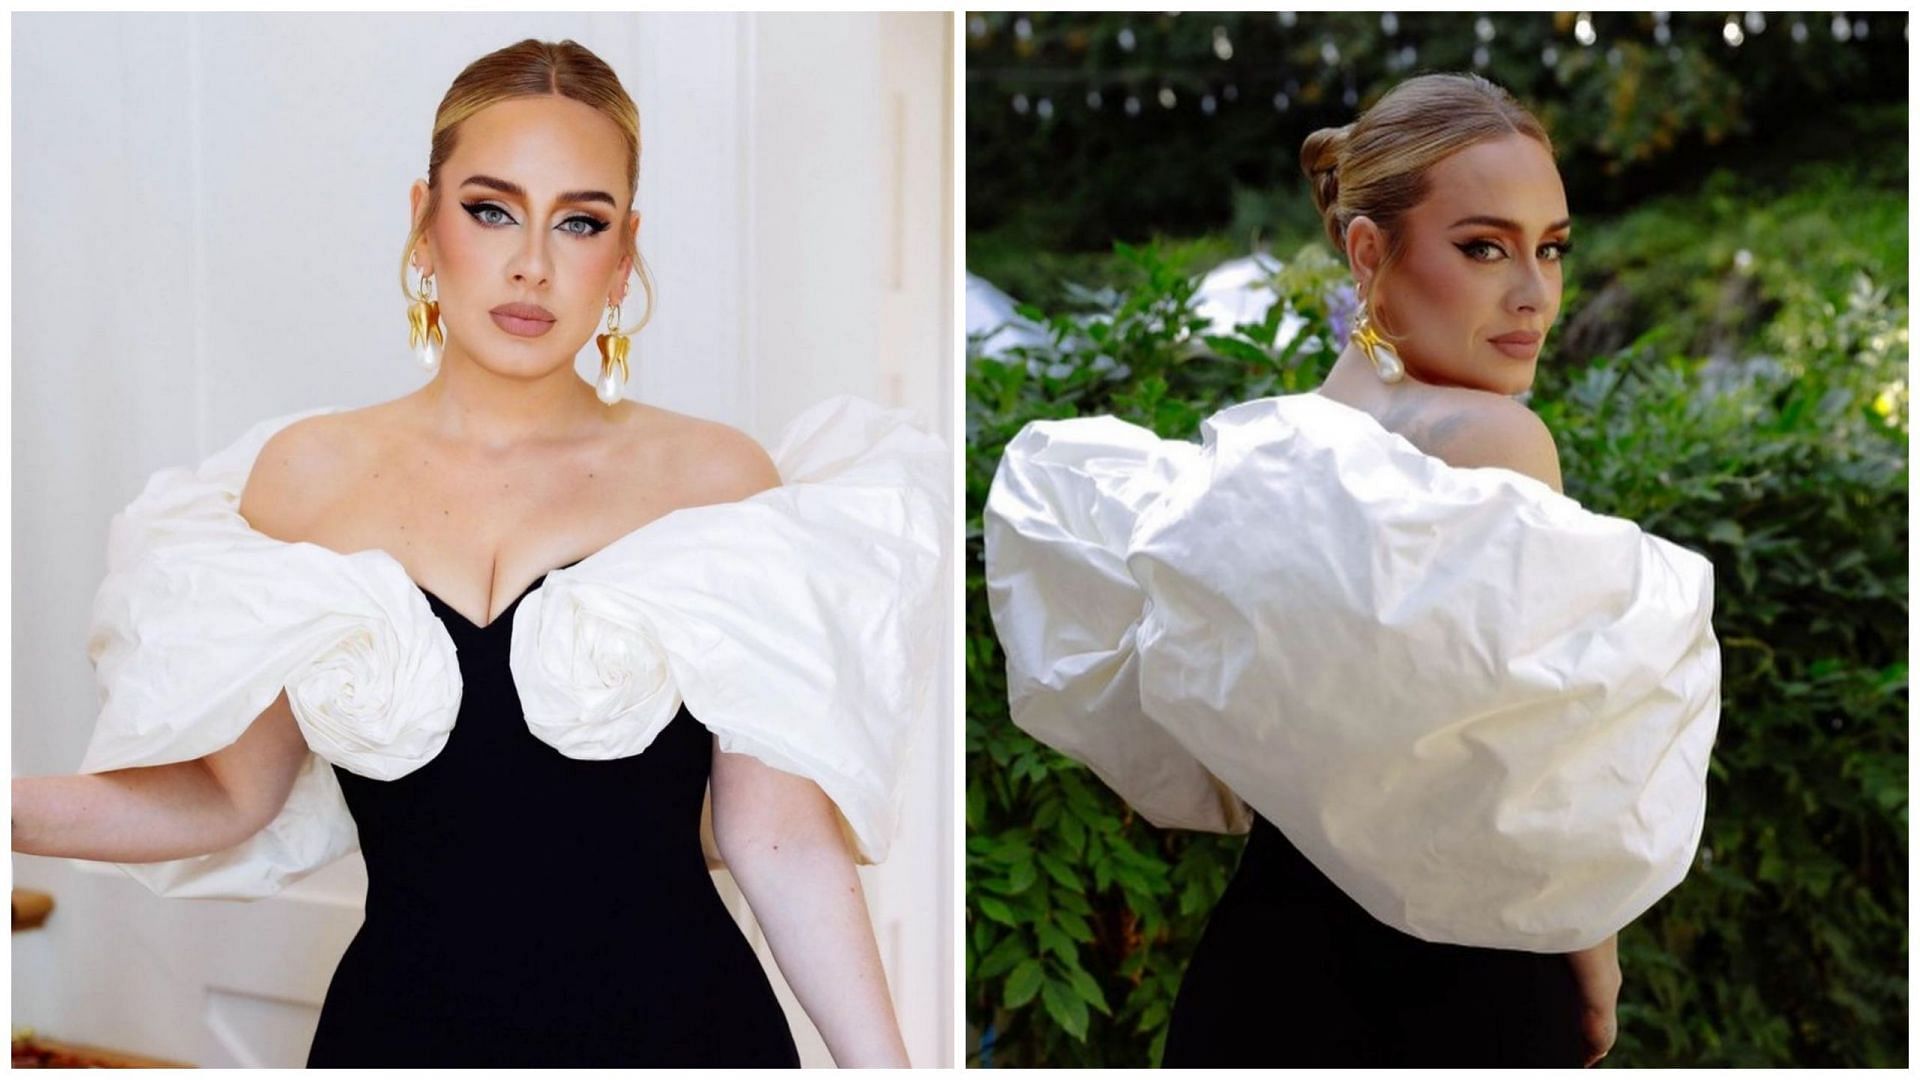 Adele spoke up about receiving hate from fans after losing weight (Image via @adele/Instagram)